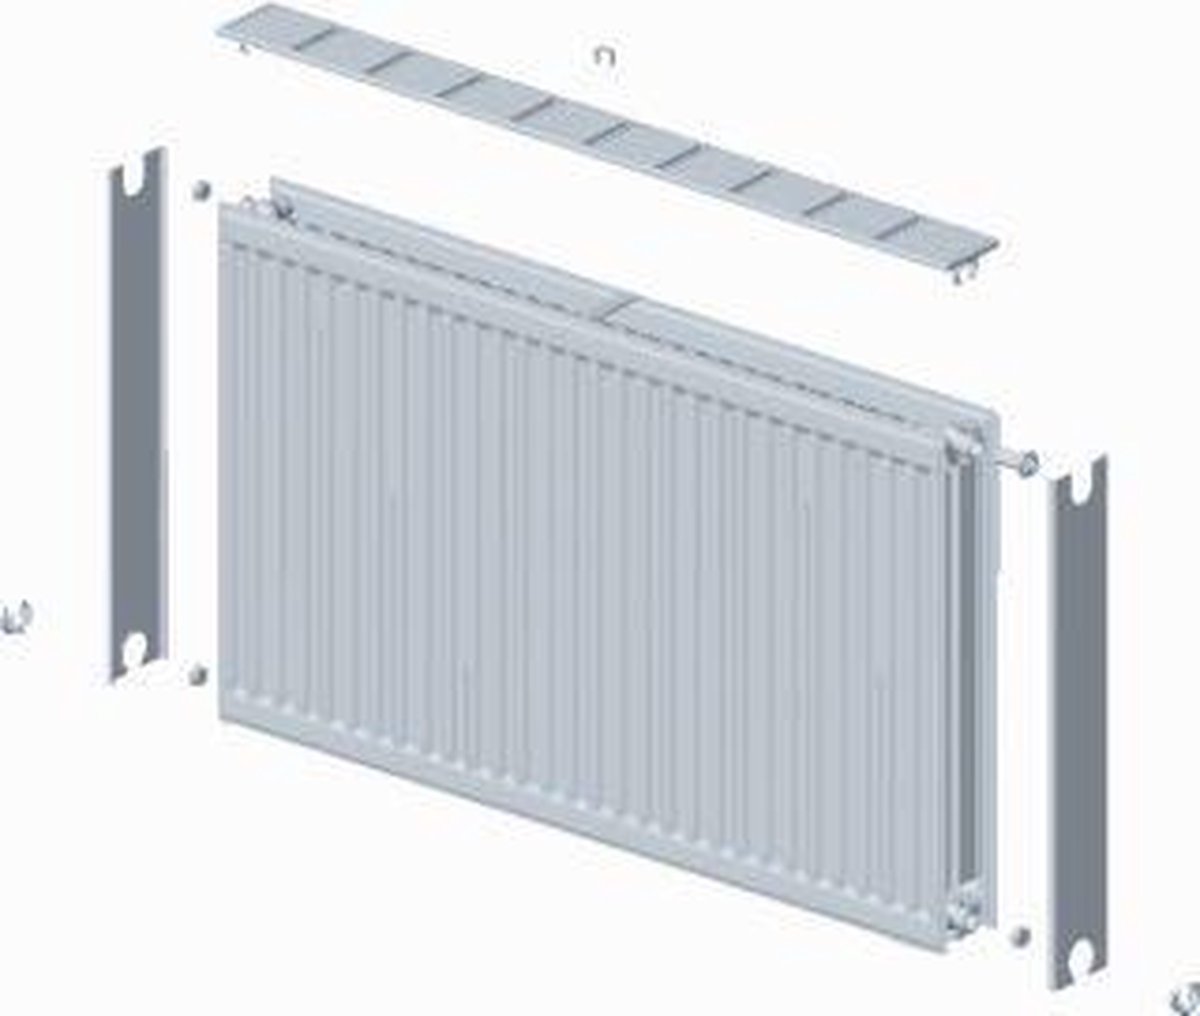 Stelrad paneelradiator Novello, staal, wit, (hxlxd) 500x1200x100mm, 22